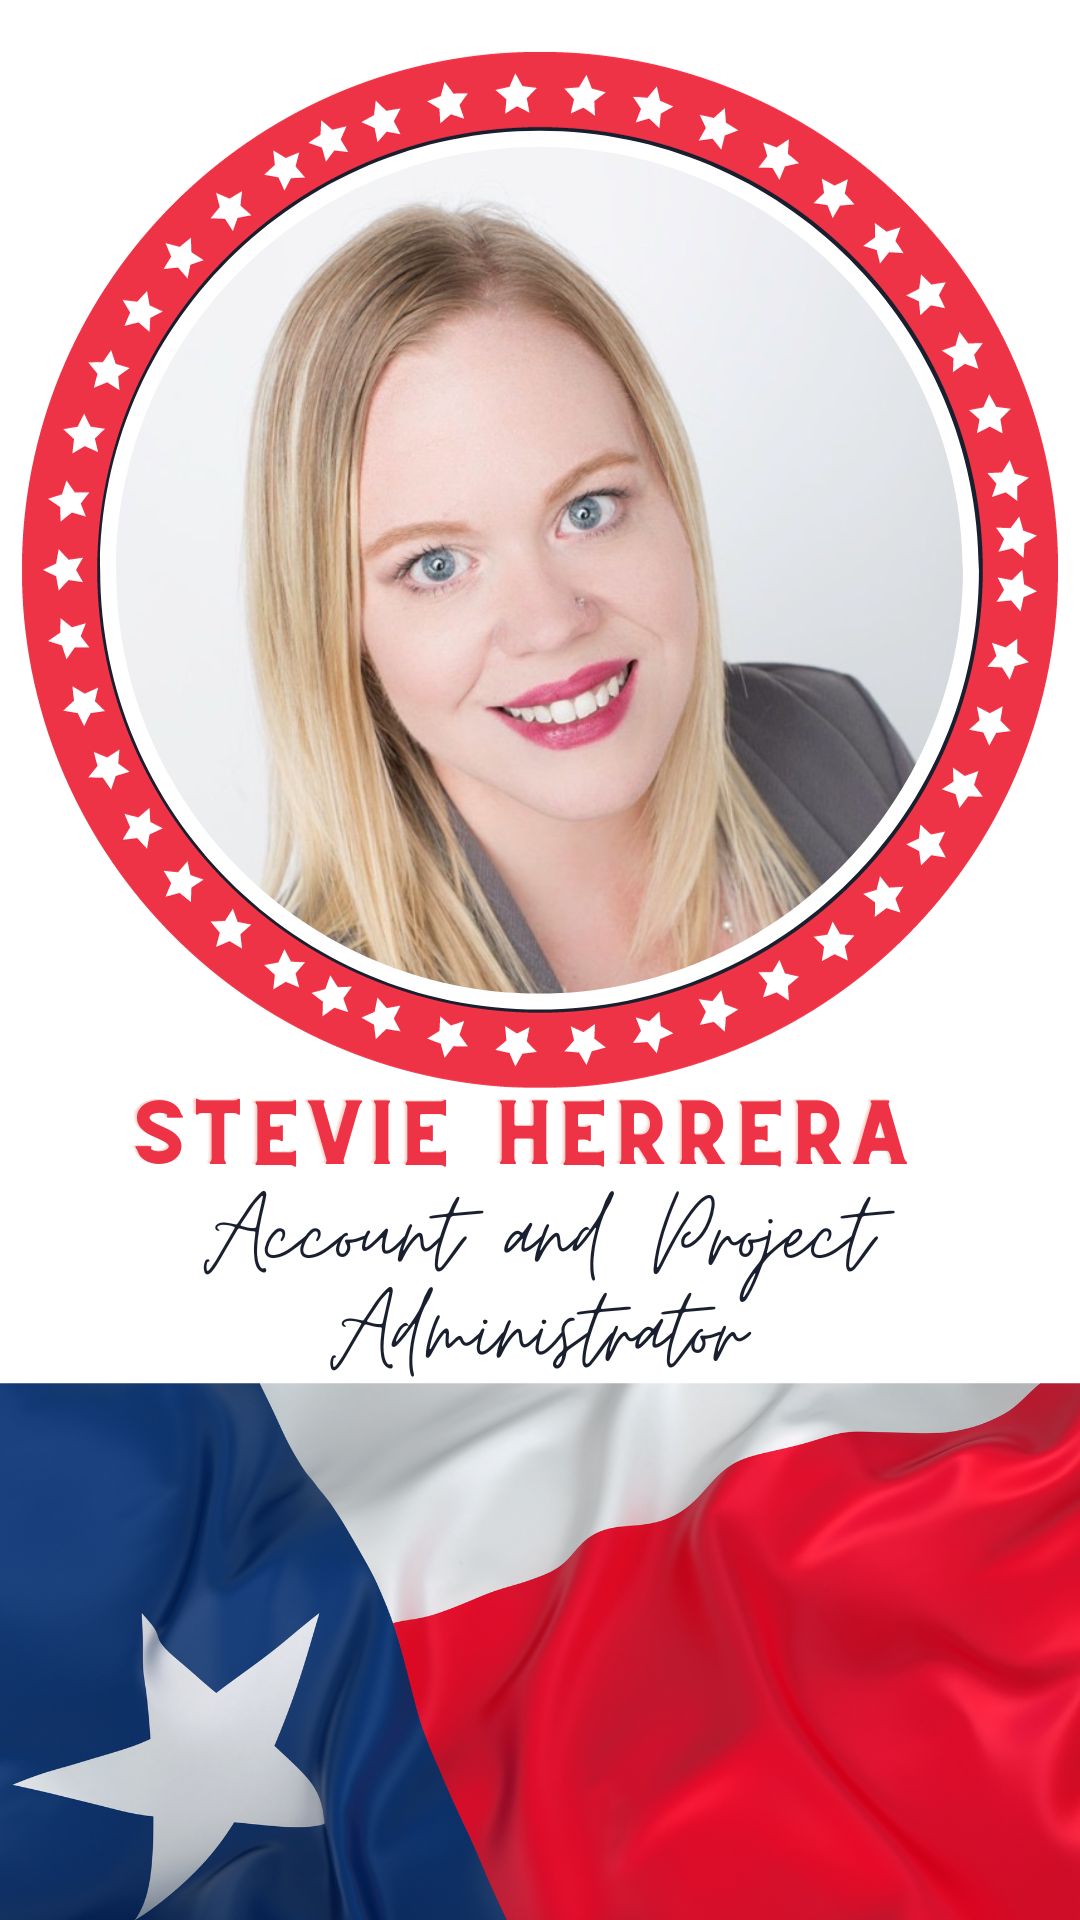 Stevie Herrera, Account and Project Administrator